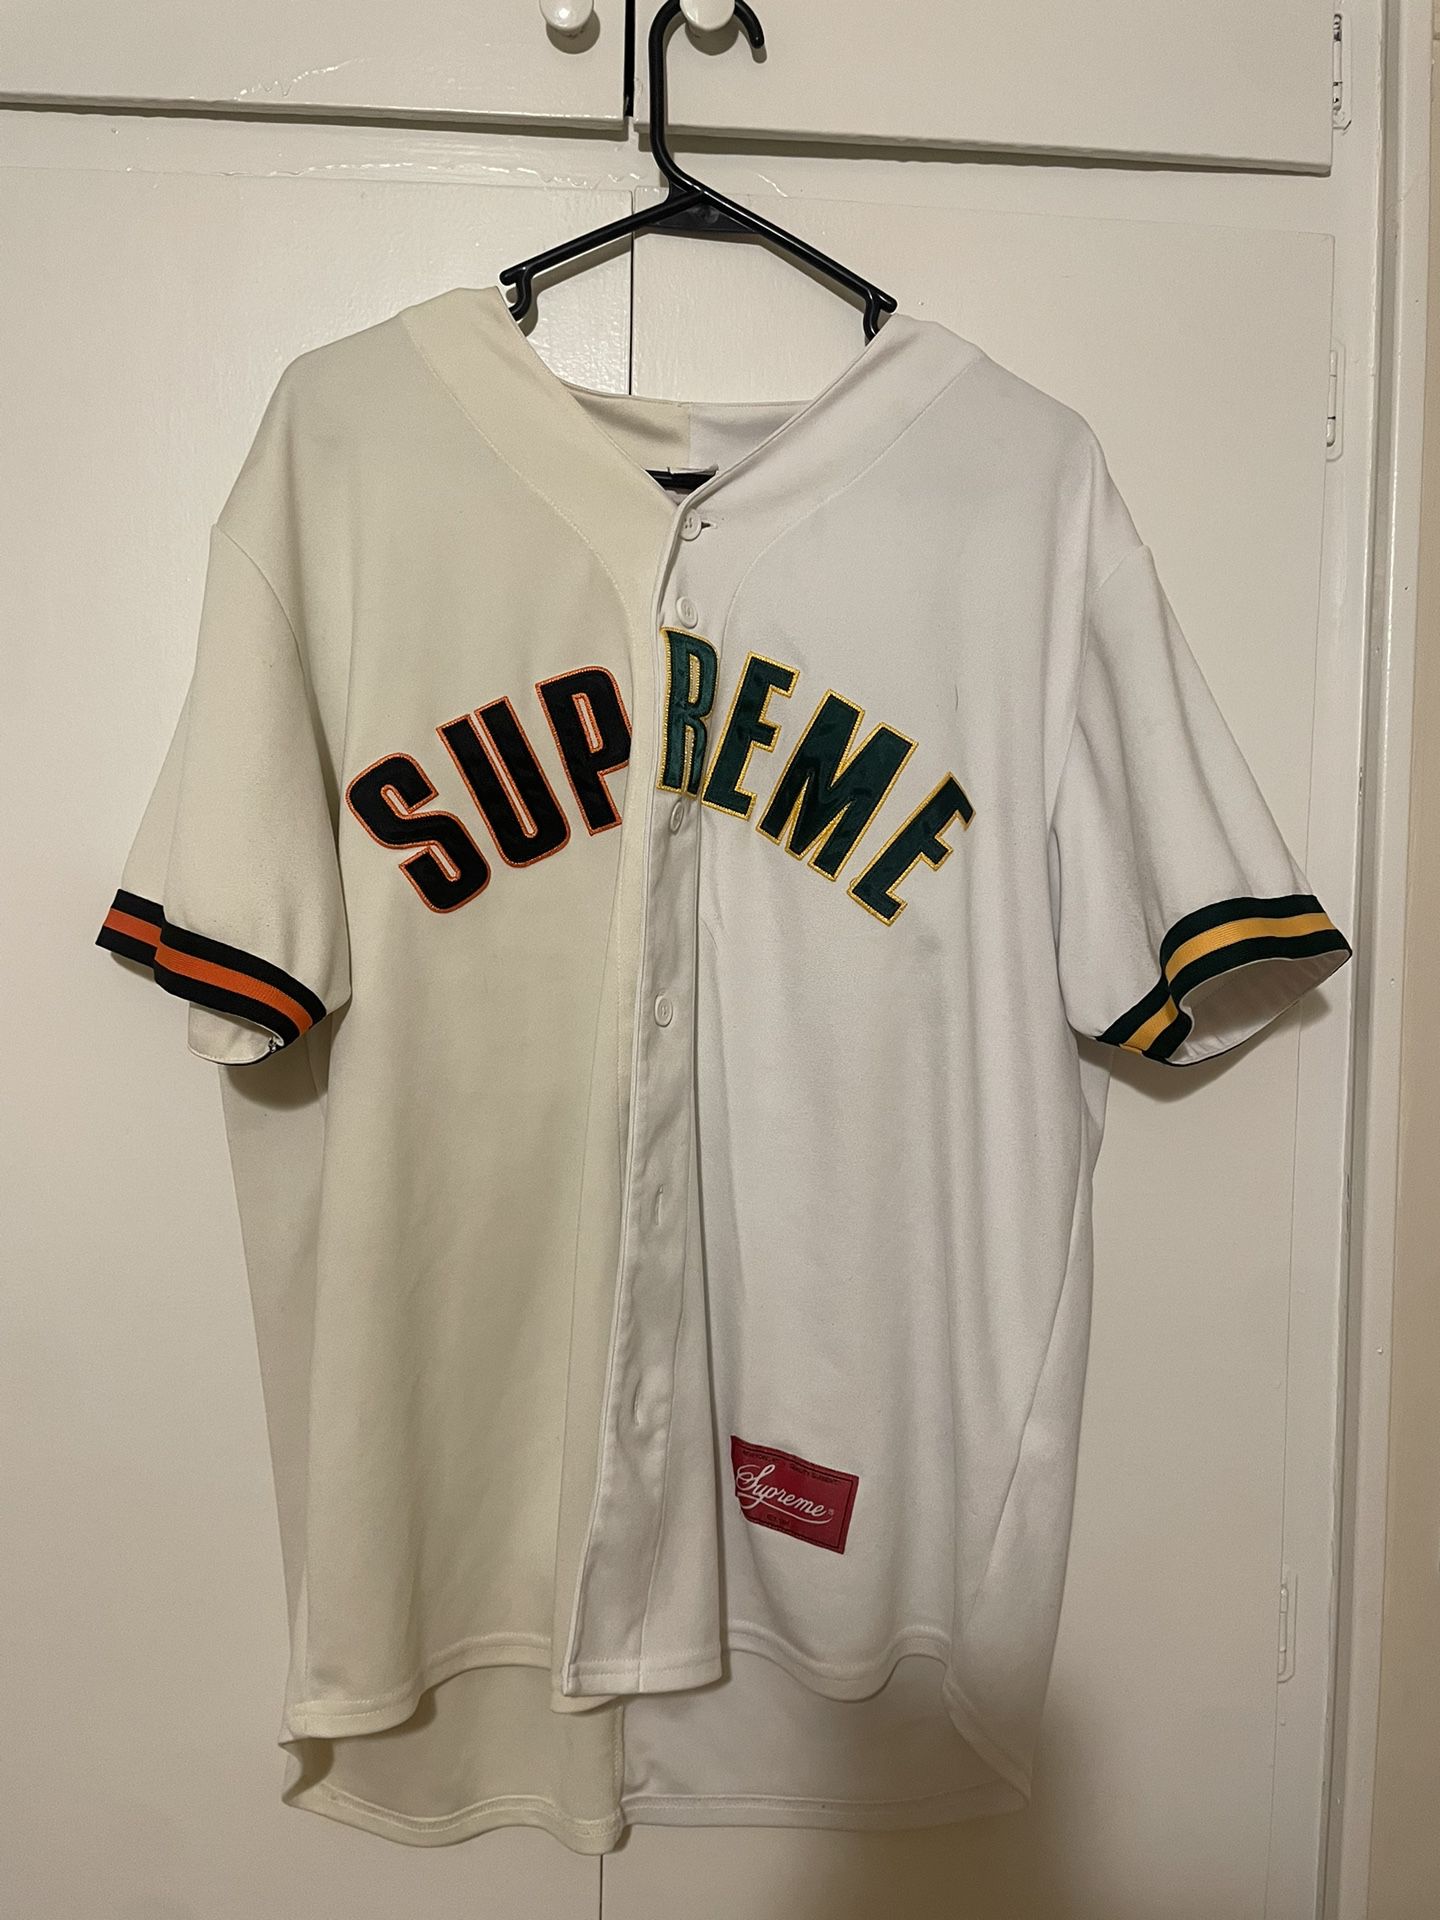 Supreme “Don’t hate” Jersey 